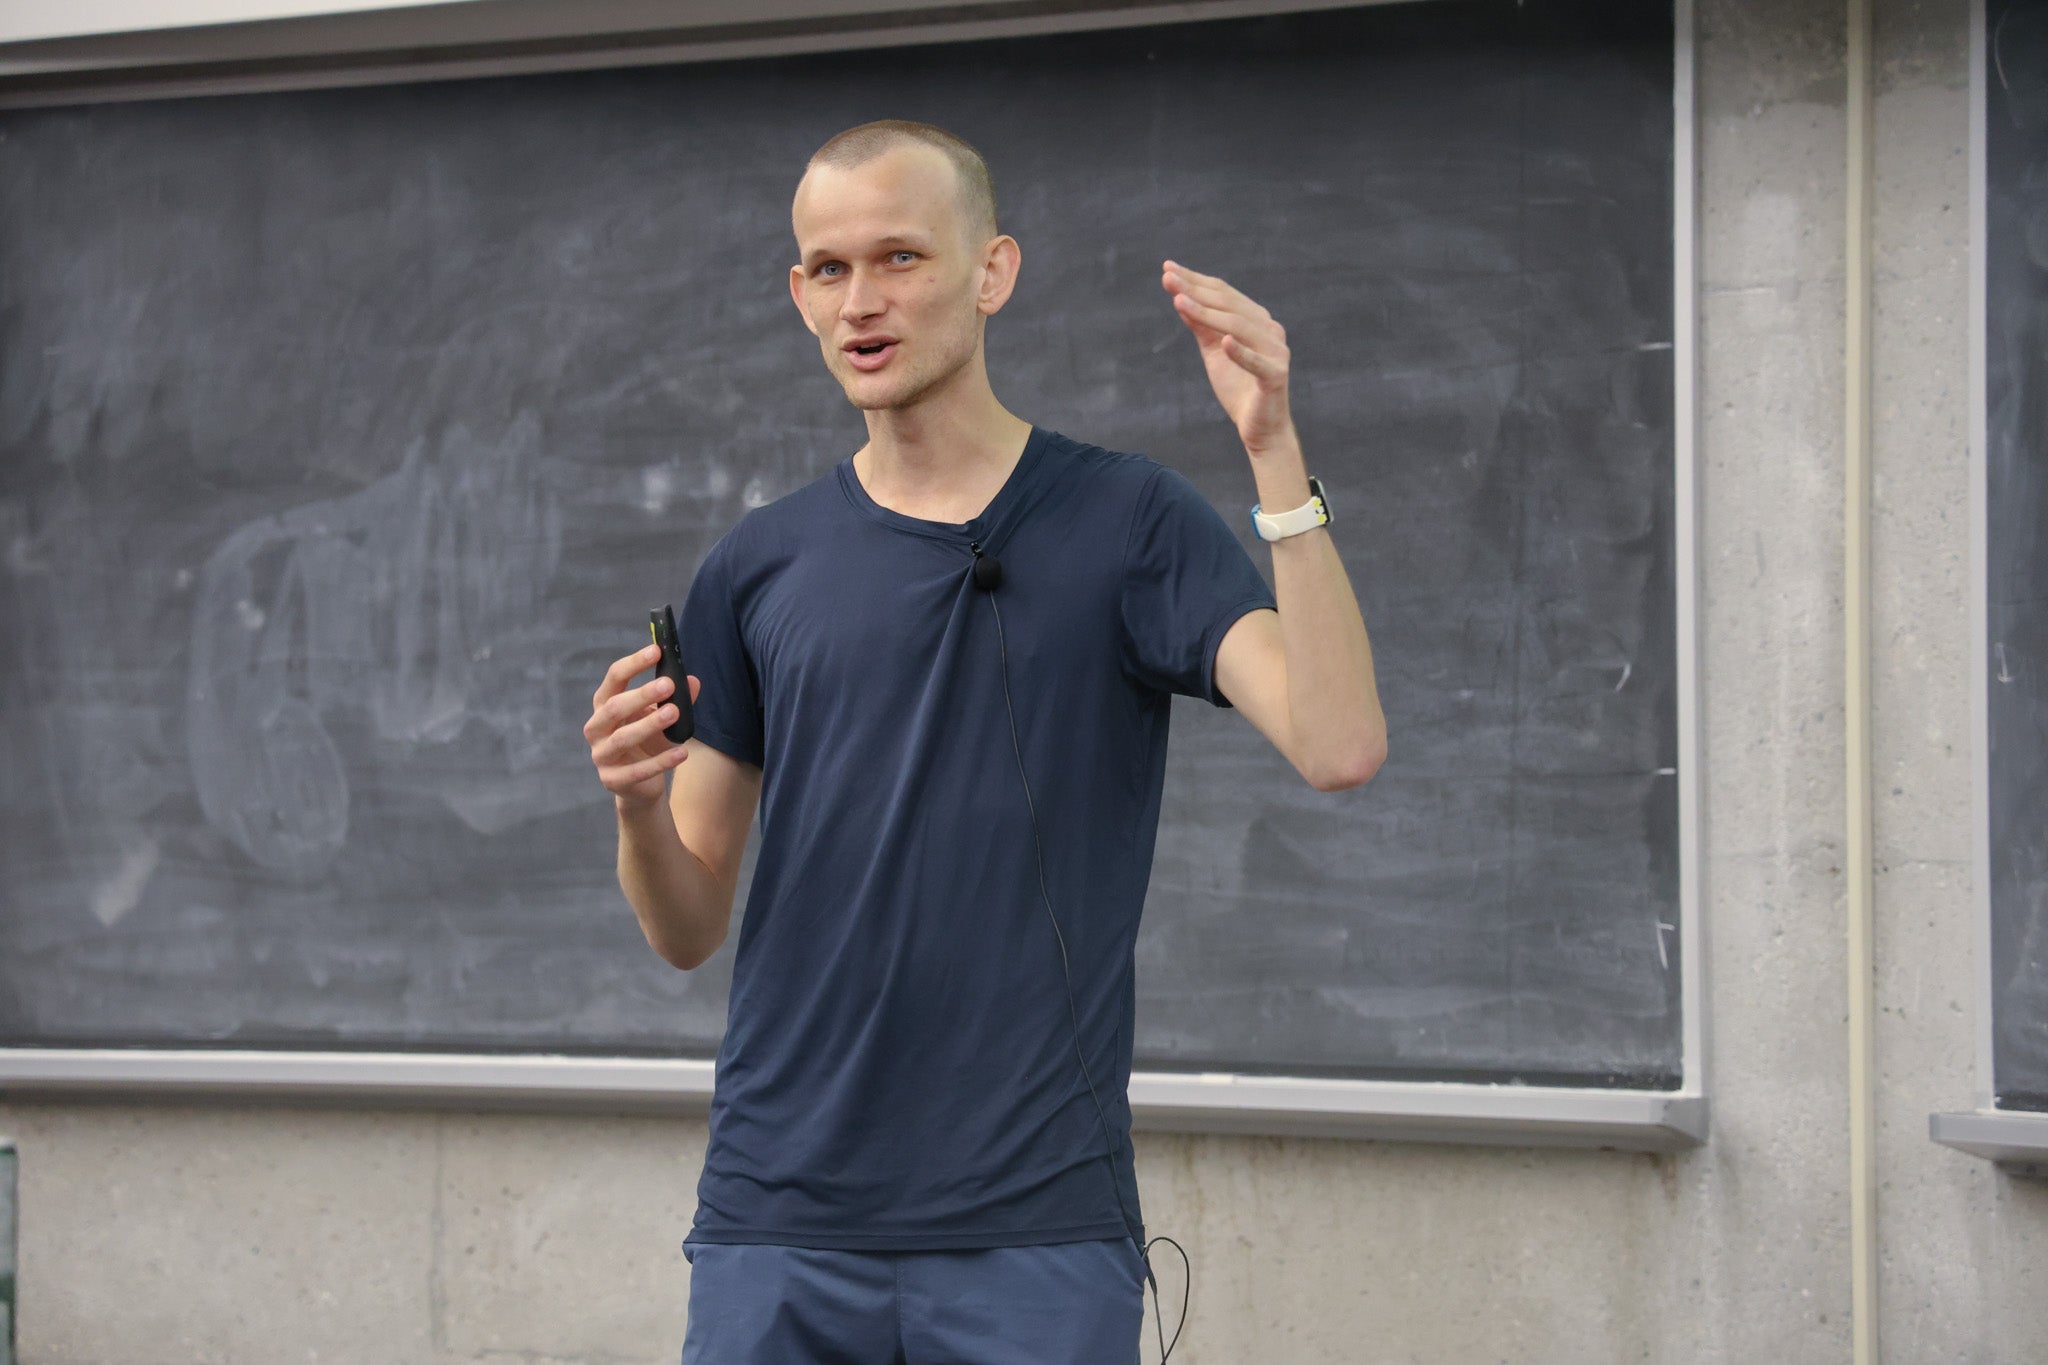 Photo of Vitalik Buterin at the Math Innovation Event. He is standing in front of a chalk board